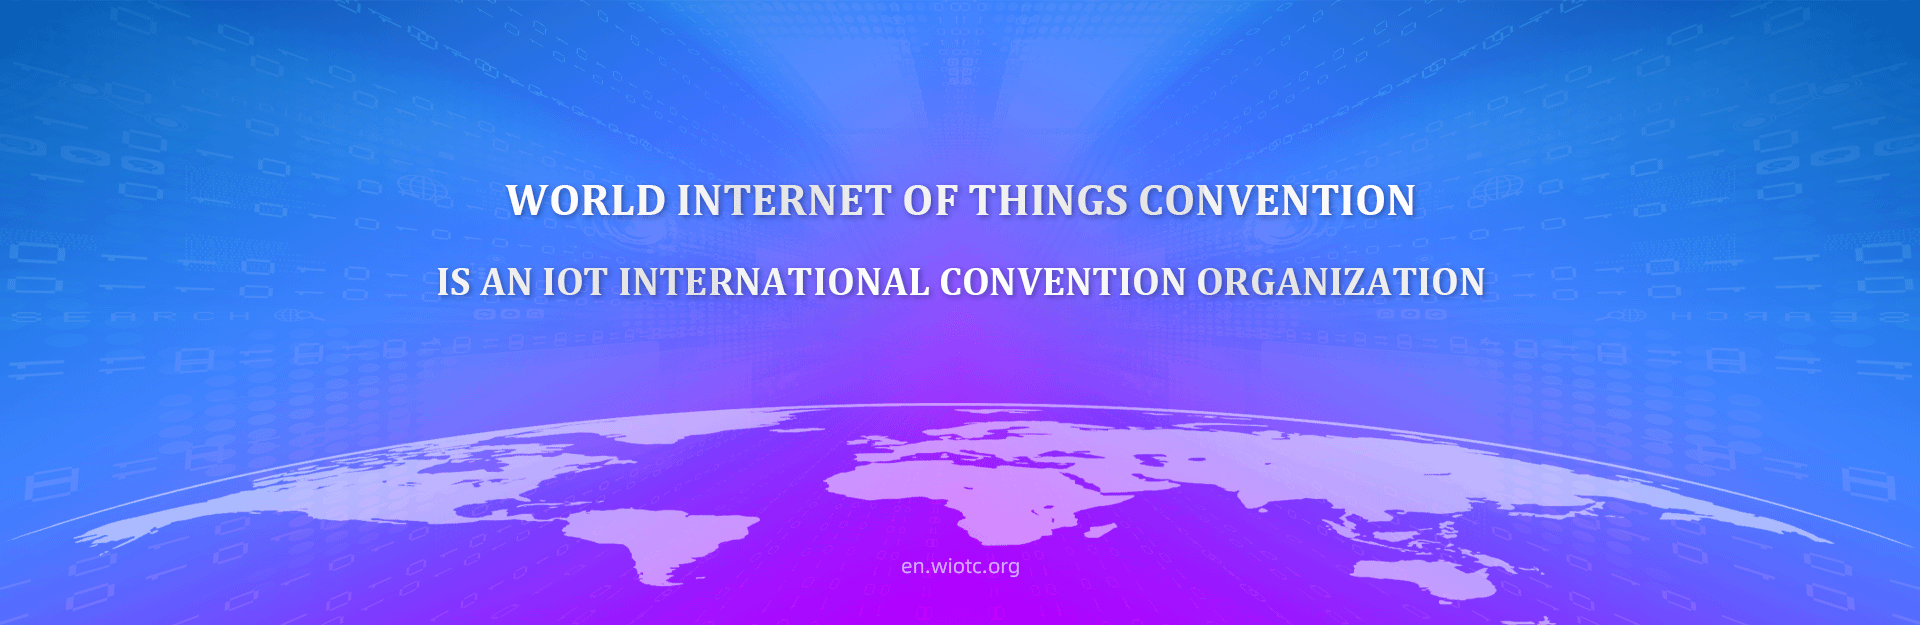 World Internet of Things Convention